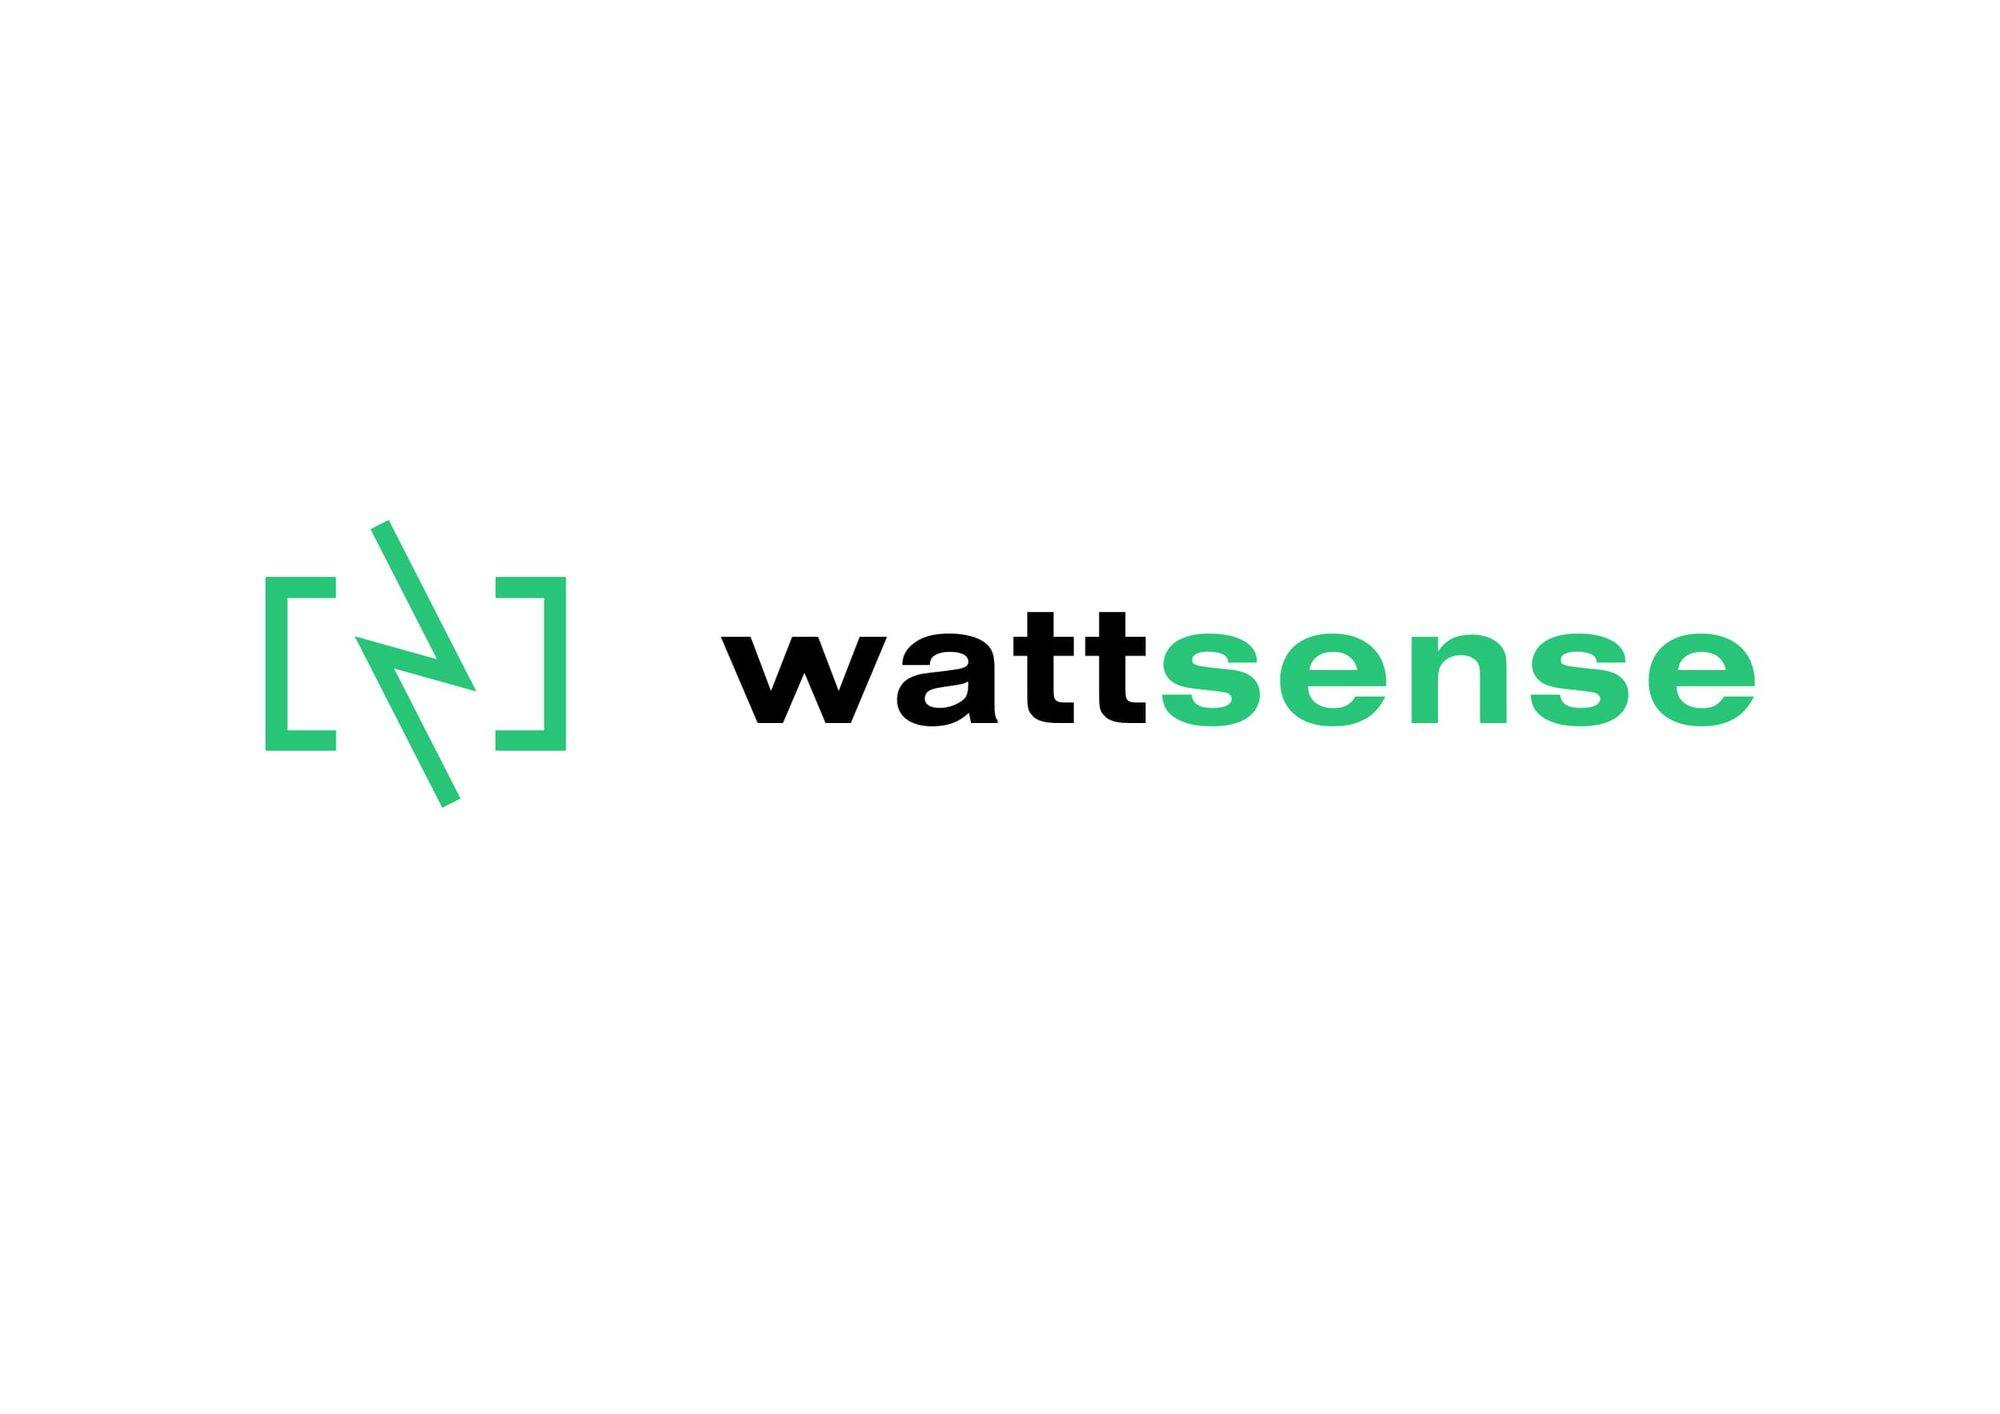 The concept behind the new visual identity and website of Wattsense